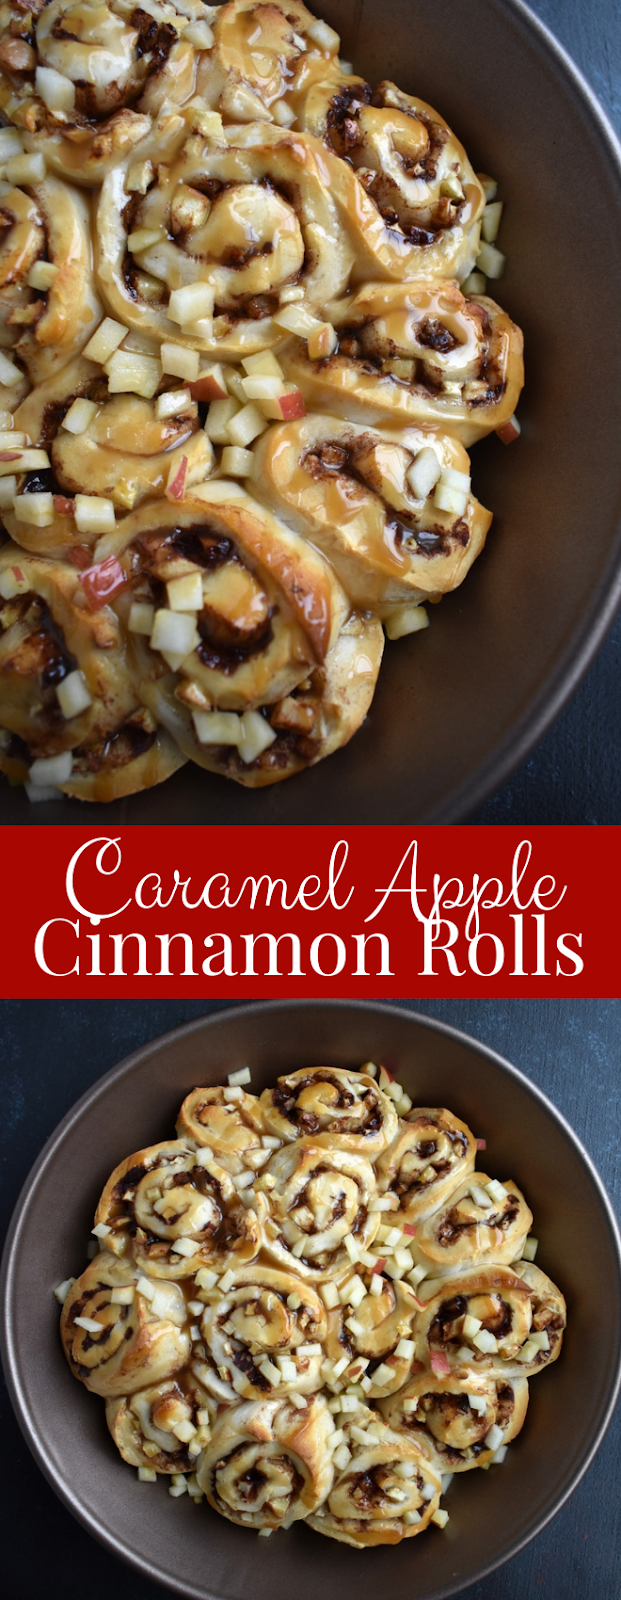 Caramel Apple Cinnamon Rolls feature ooey gooey cinnamon rolls with fresh honeycrisp apples and a hefty drizzle of caramel sauce for the perfect brunch or dessert addition! www.nutritionistreviews.com #brunch #breakfast #dessert #cinnamonrolls #holidays #apples